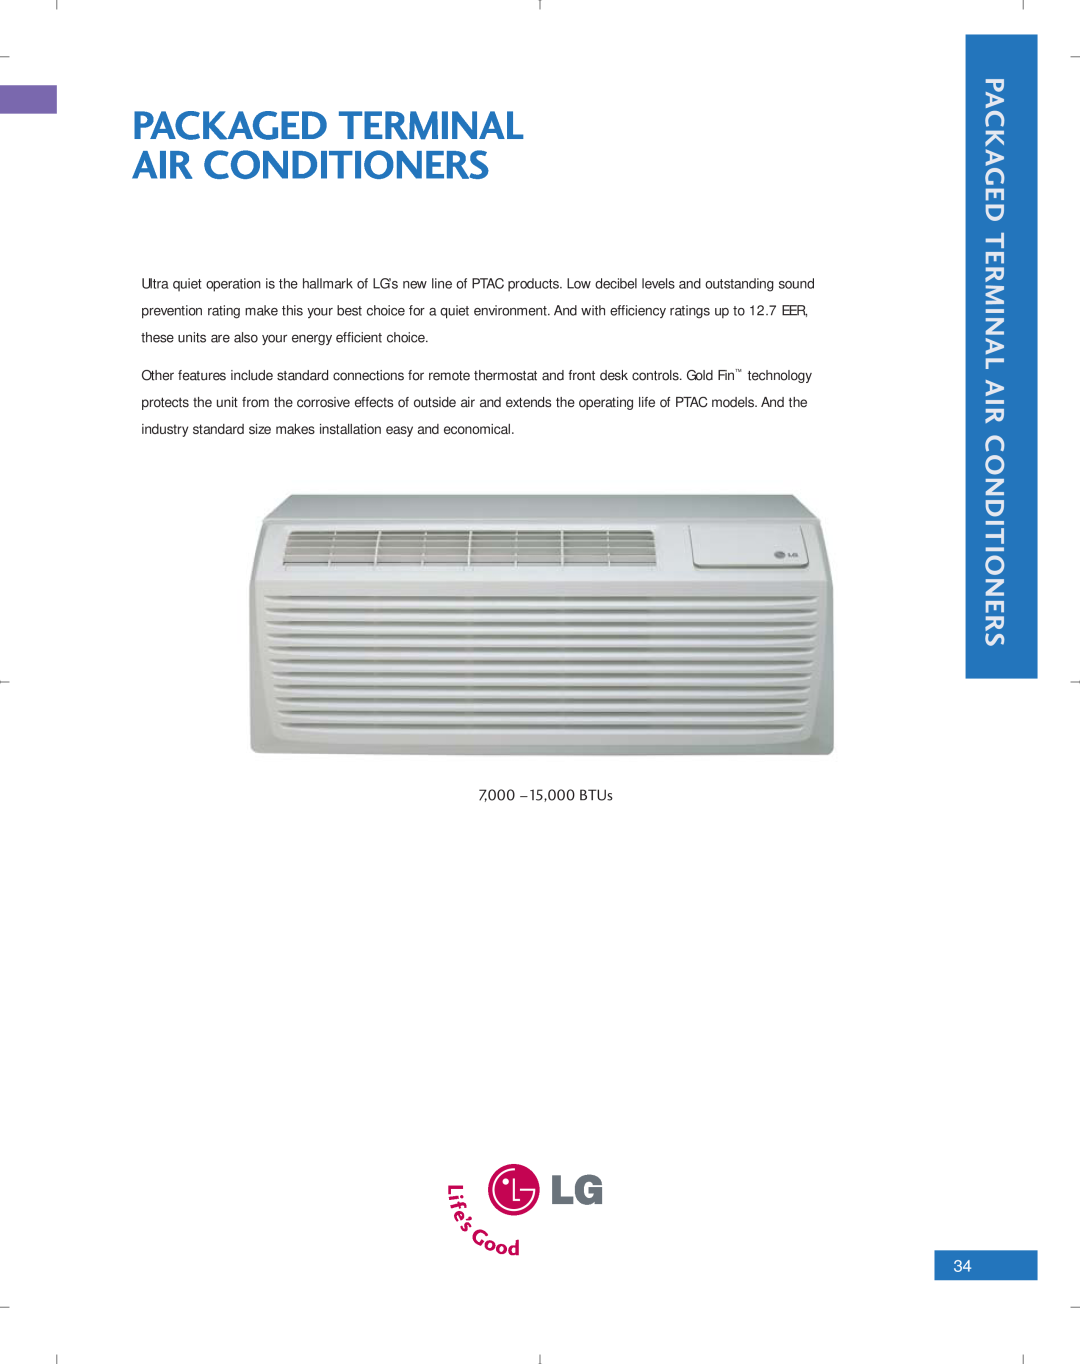 LG Electronics PG-100-2006-VER3 manual Packaged Terminal Air Conditioners, 7,000 -15,000 BTUs 